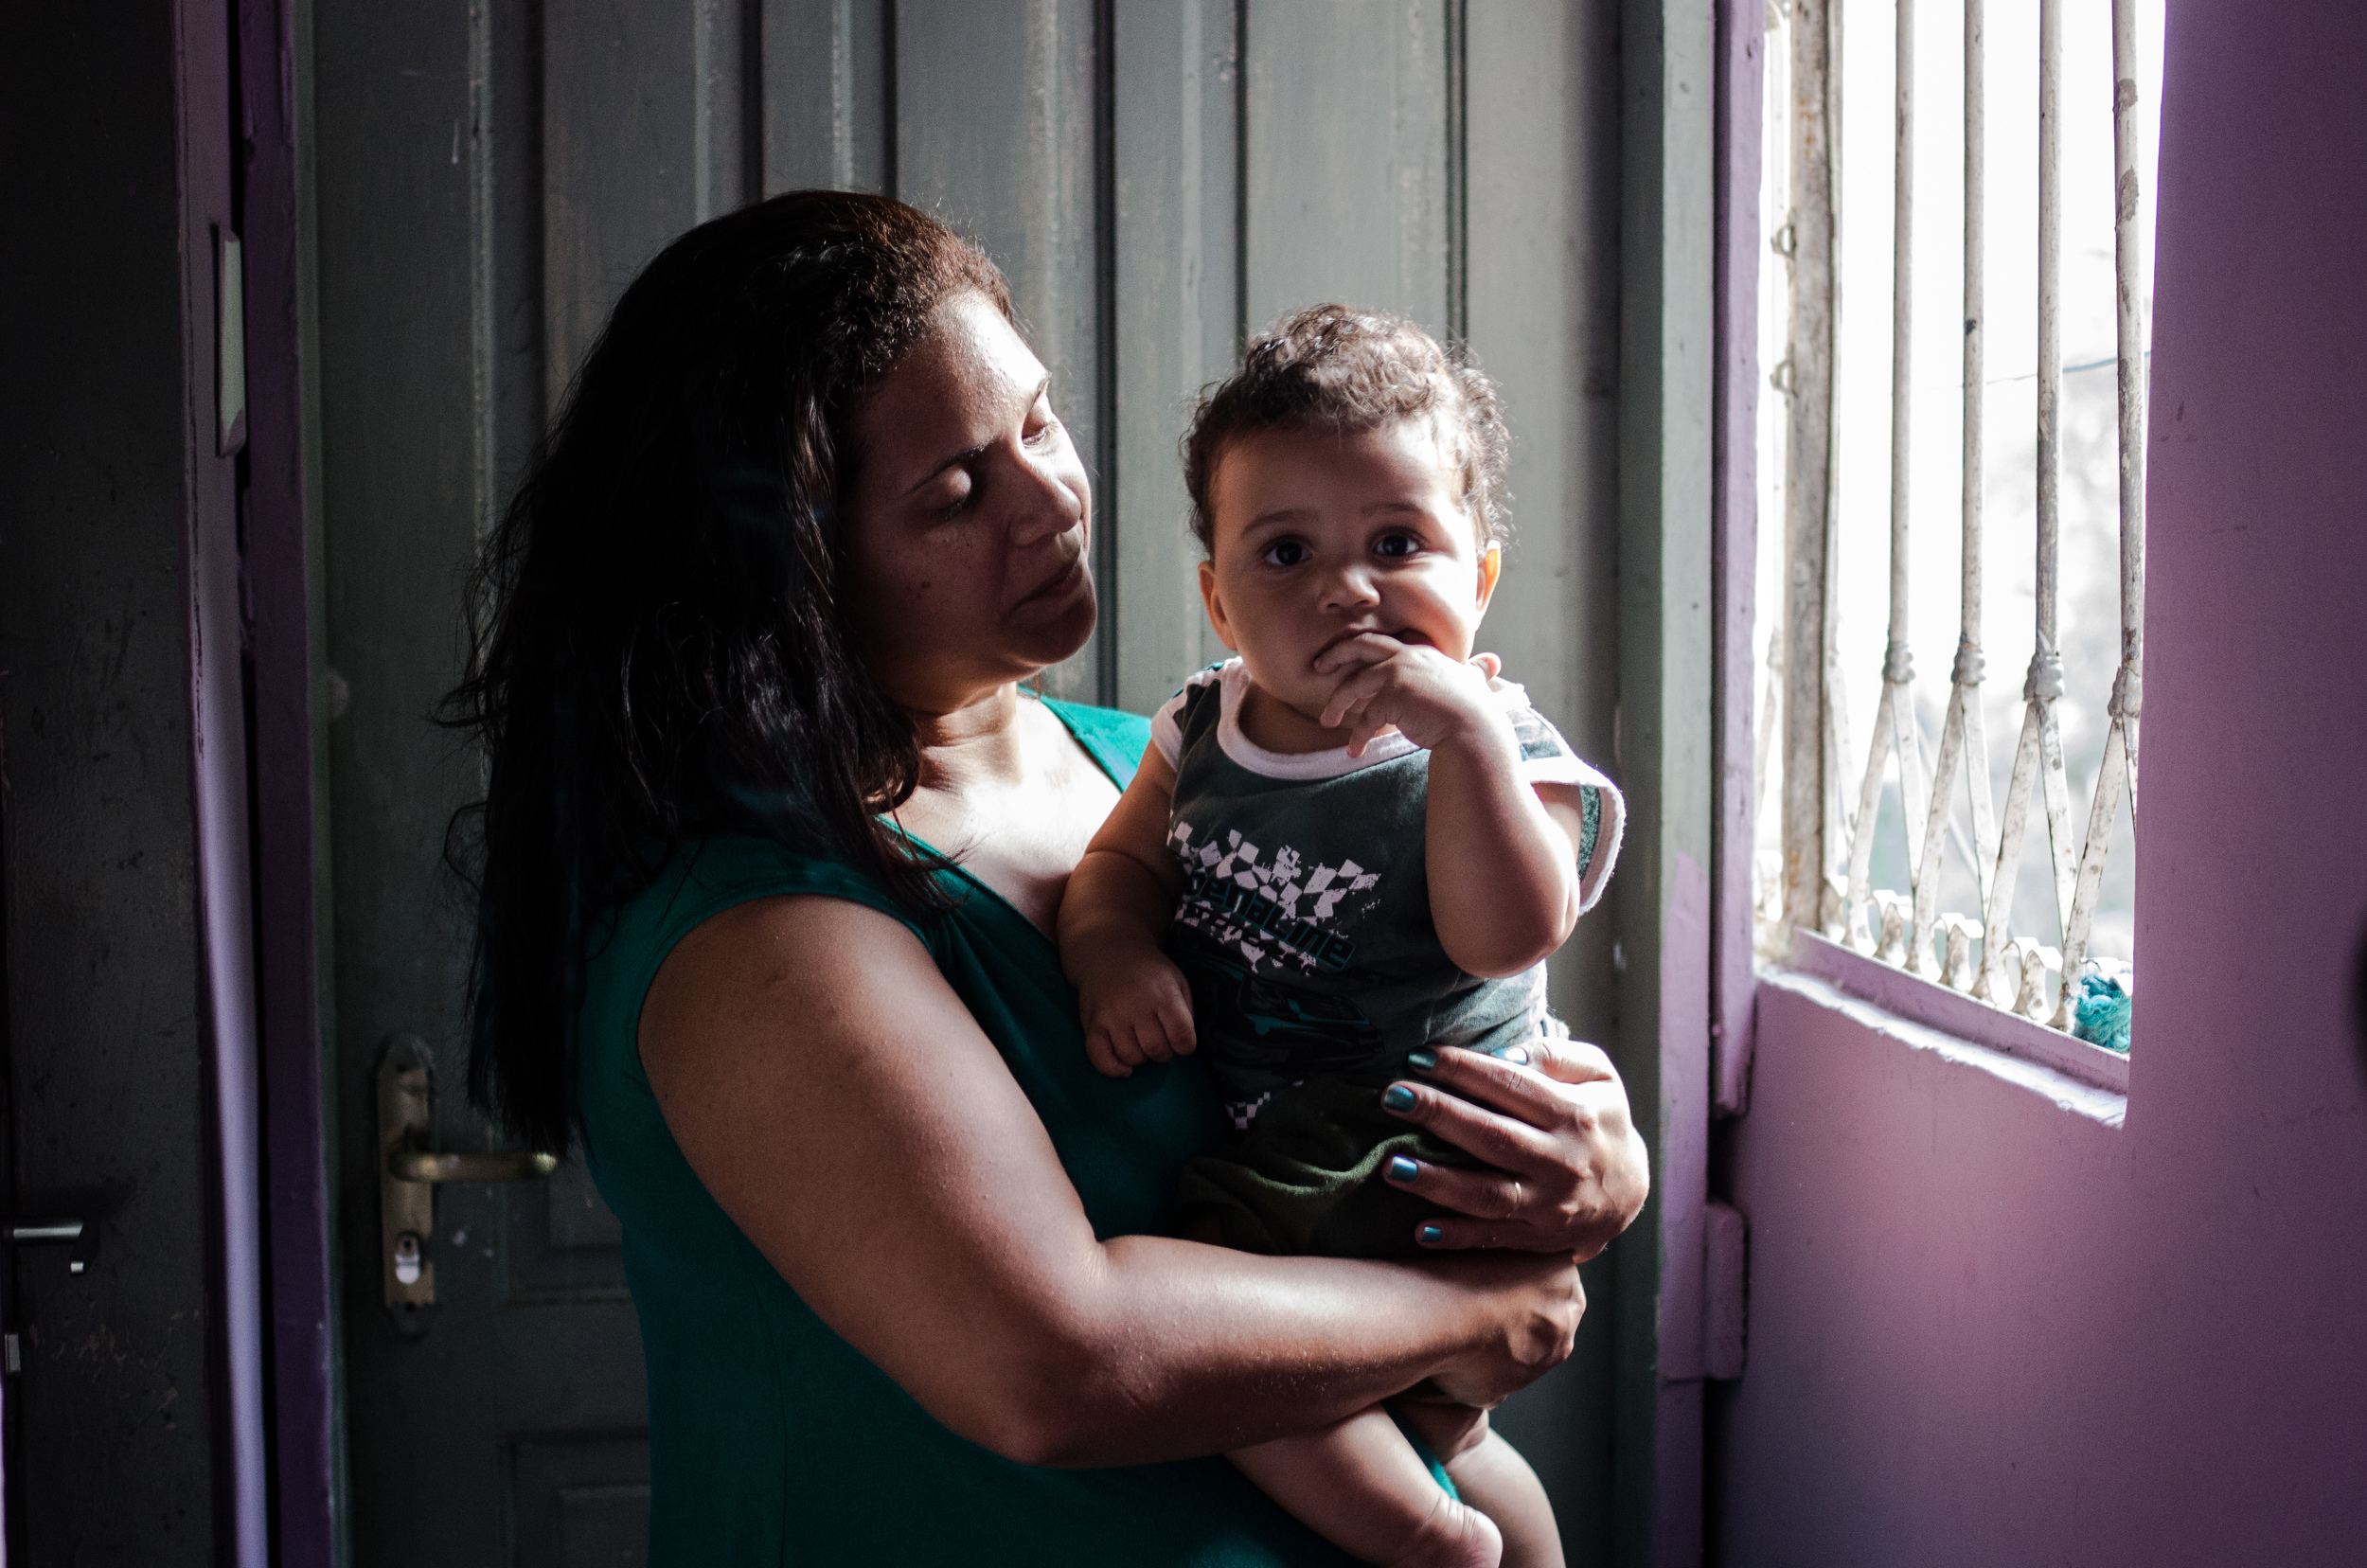   Cássia with her younger son.&nbsp;Pregnancy was a vital point in Cássia's life. She discovered the disease during routine exams and&nbsp;transmitting the virus to her son became the biggest concern.&nbsp;They&nbsp;hope for&nbsp;better days to come.